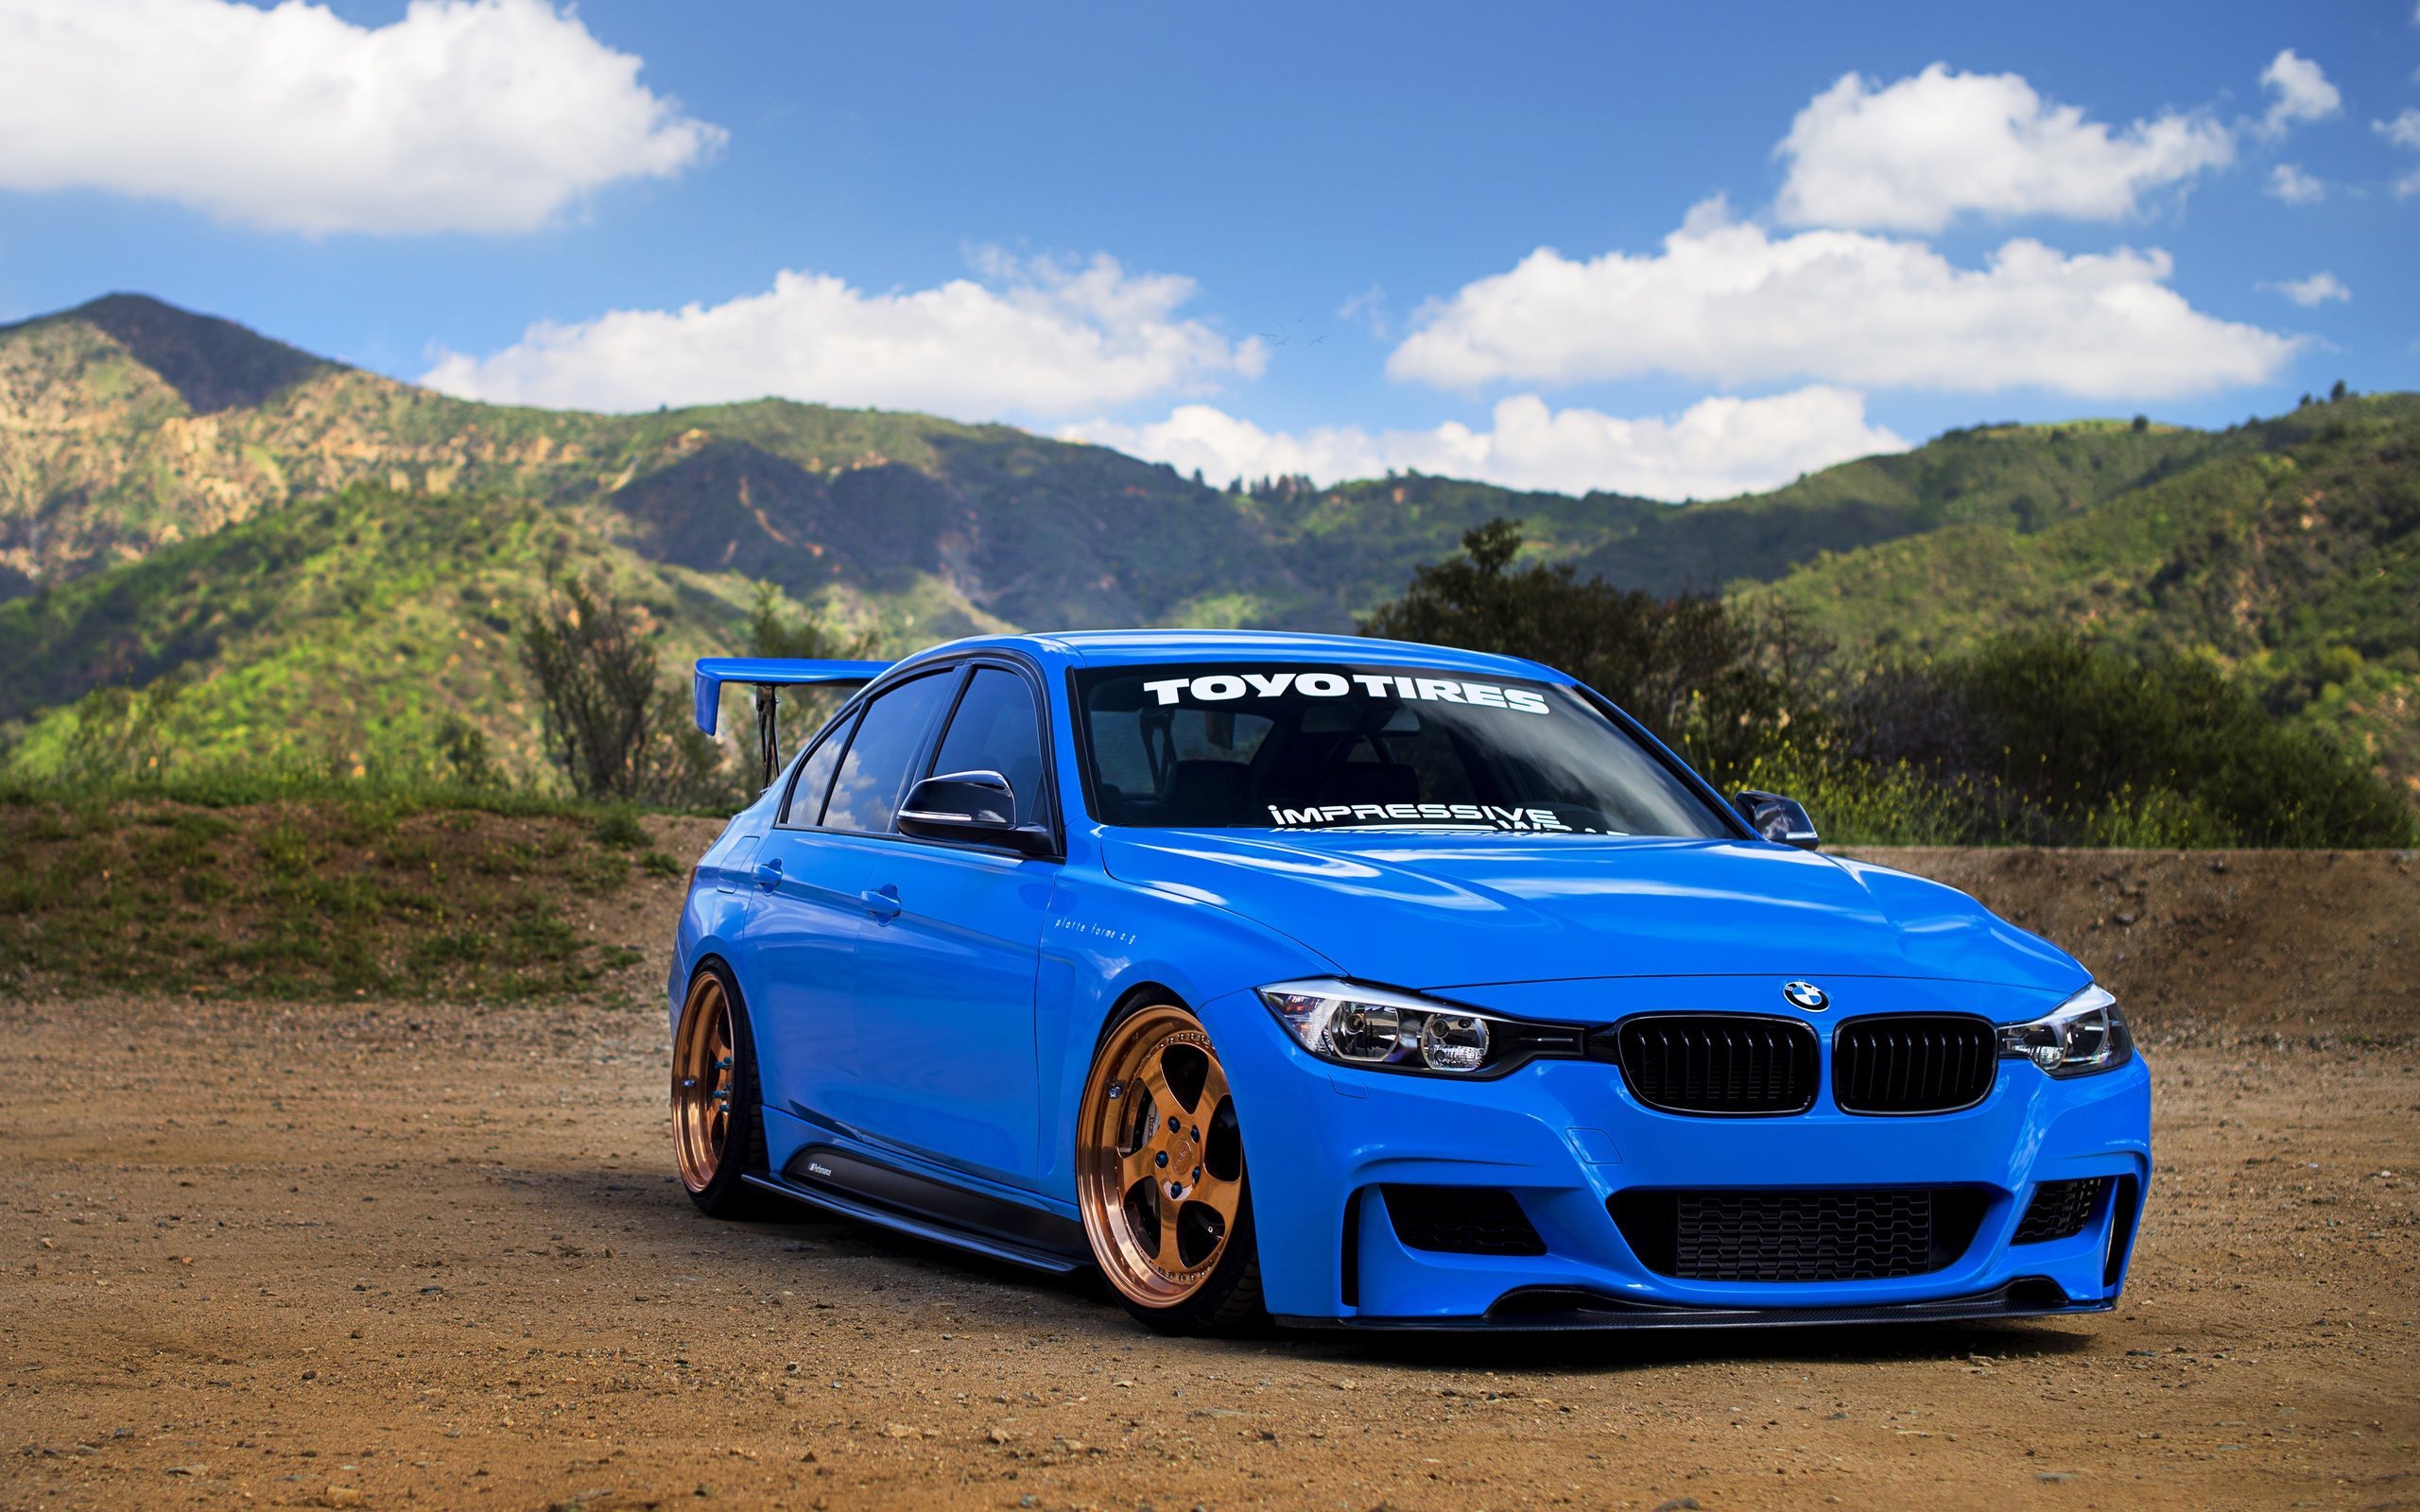 Bmw M3, F30, Blue M3, Tuning Bmw, Sport Coupe, Tuning - Tuning Wallpapers Pc Cars Bmw - HD Wallpaper 